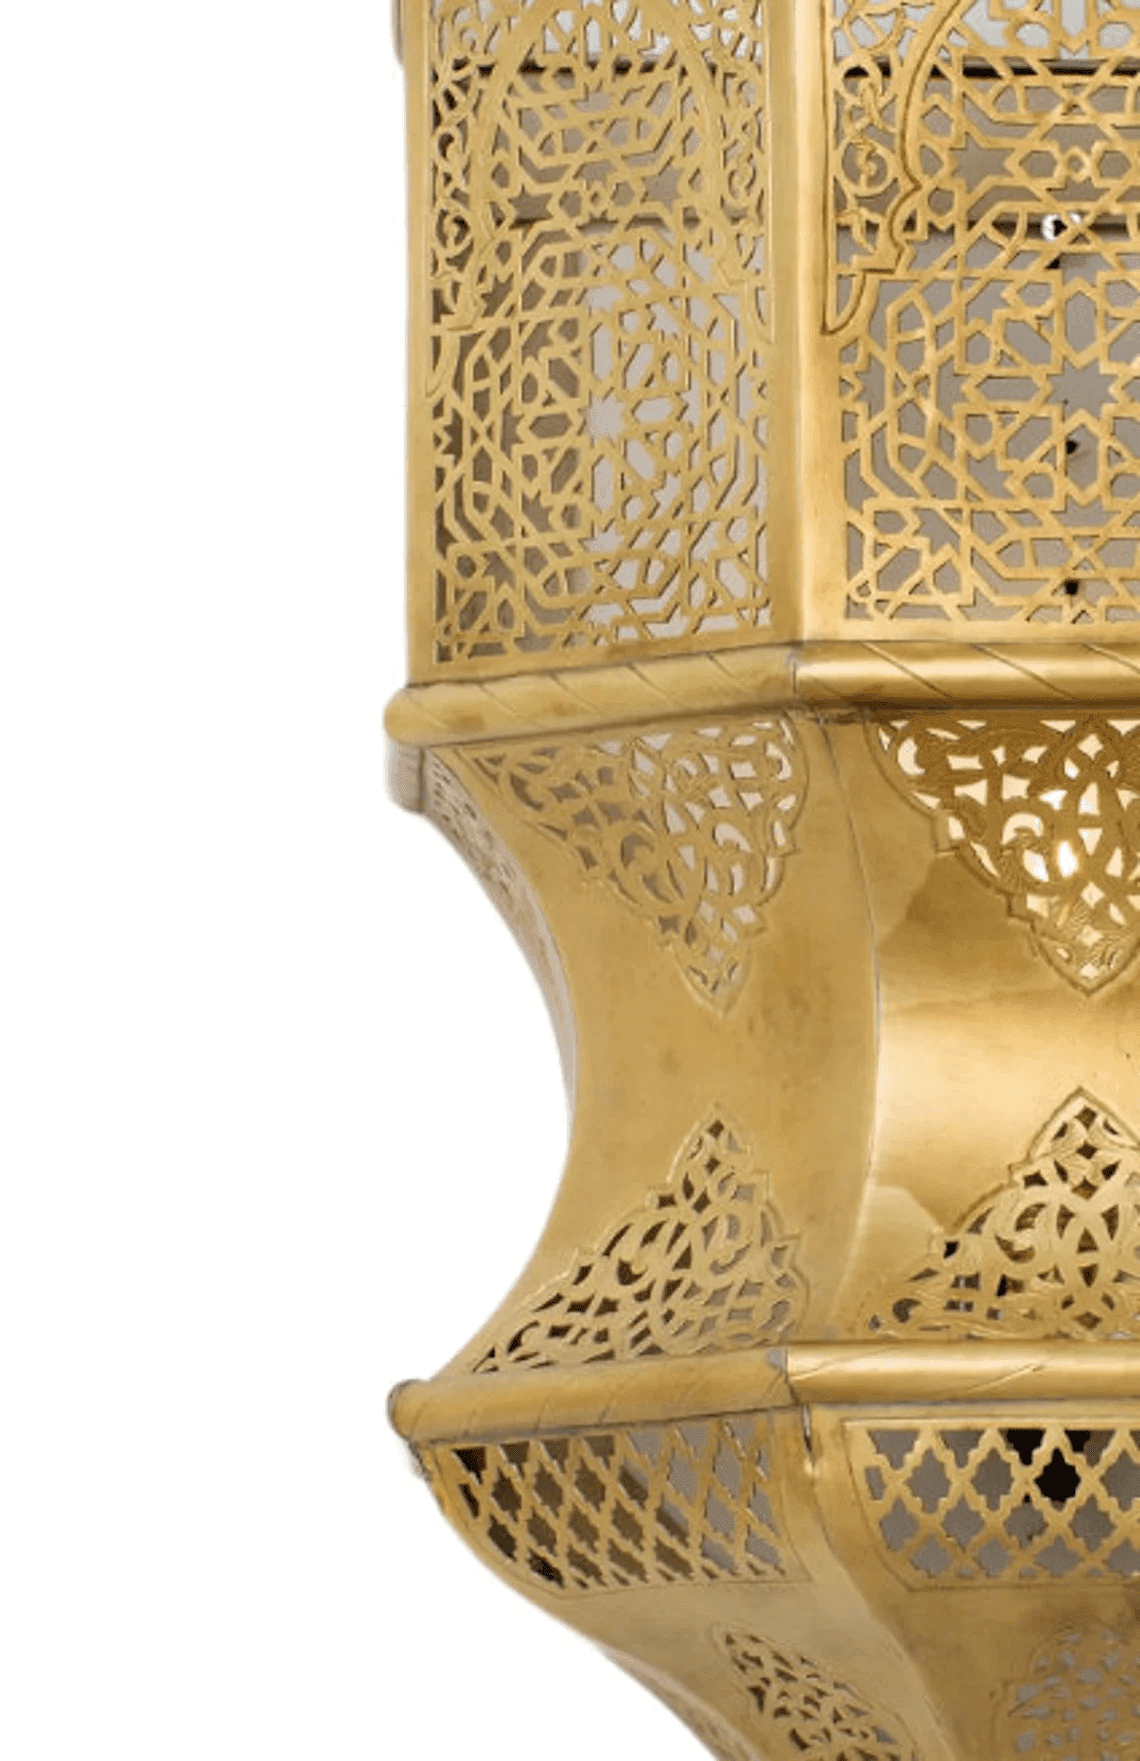 wall sconce, traditional sconce, moroccan lamp, moroccan sconce, sconce lamp, wall lamp, brass sconce, moroccan mosaic lighting - Ettilux Home